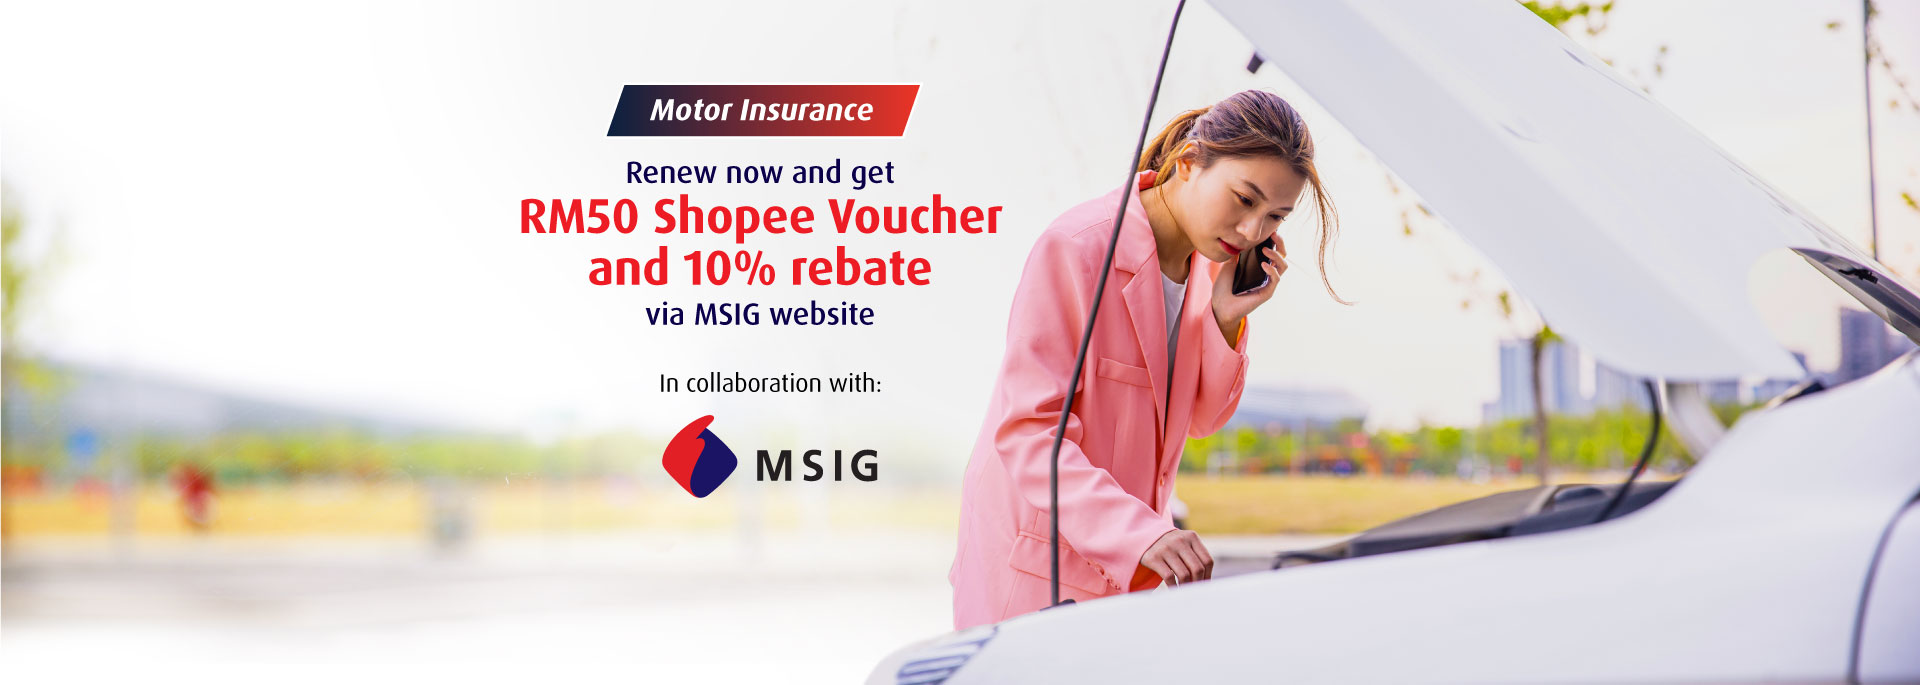 Renew now and get RM50 Shopee Voucher and 10% rebate via MSIG website